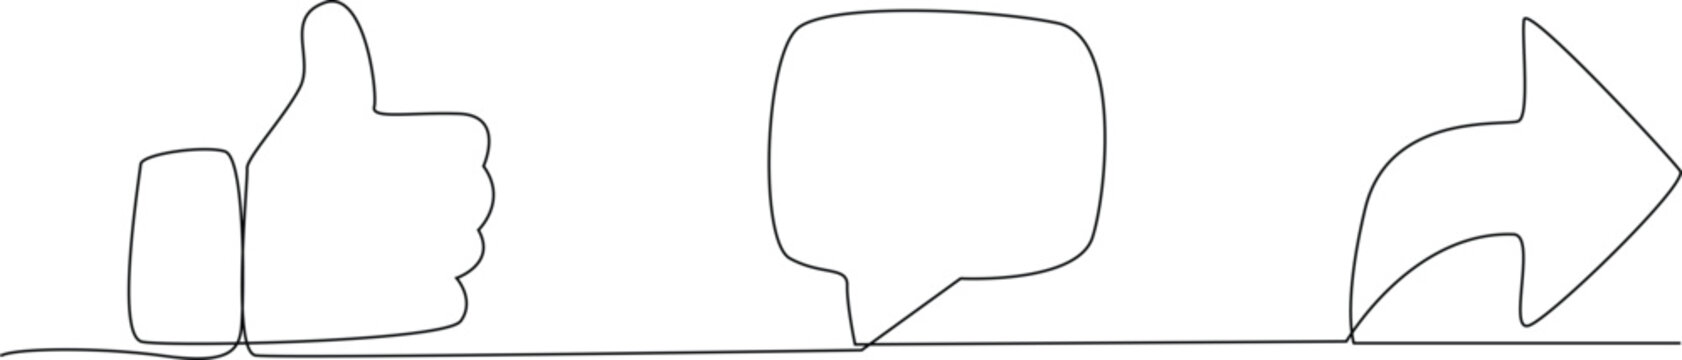 single one line drawing notification icons of like, message and comment. social media concept. conti